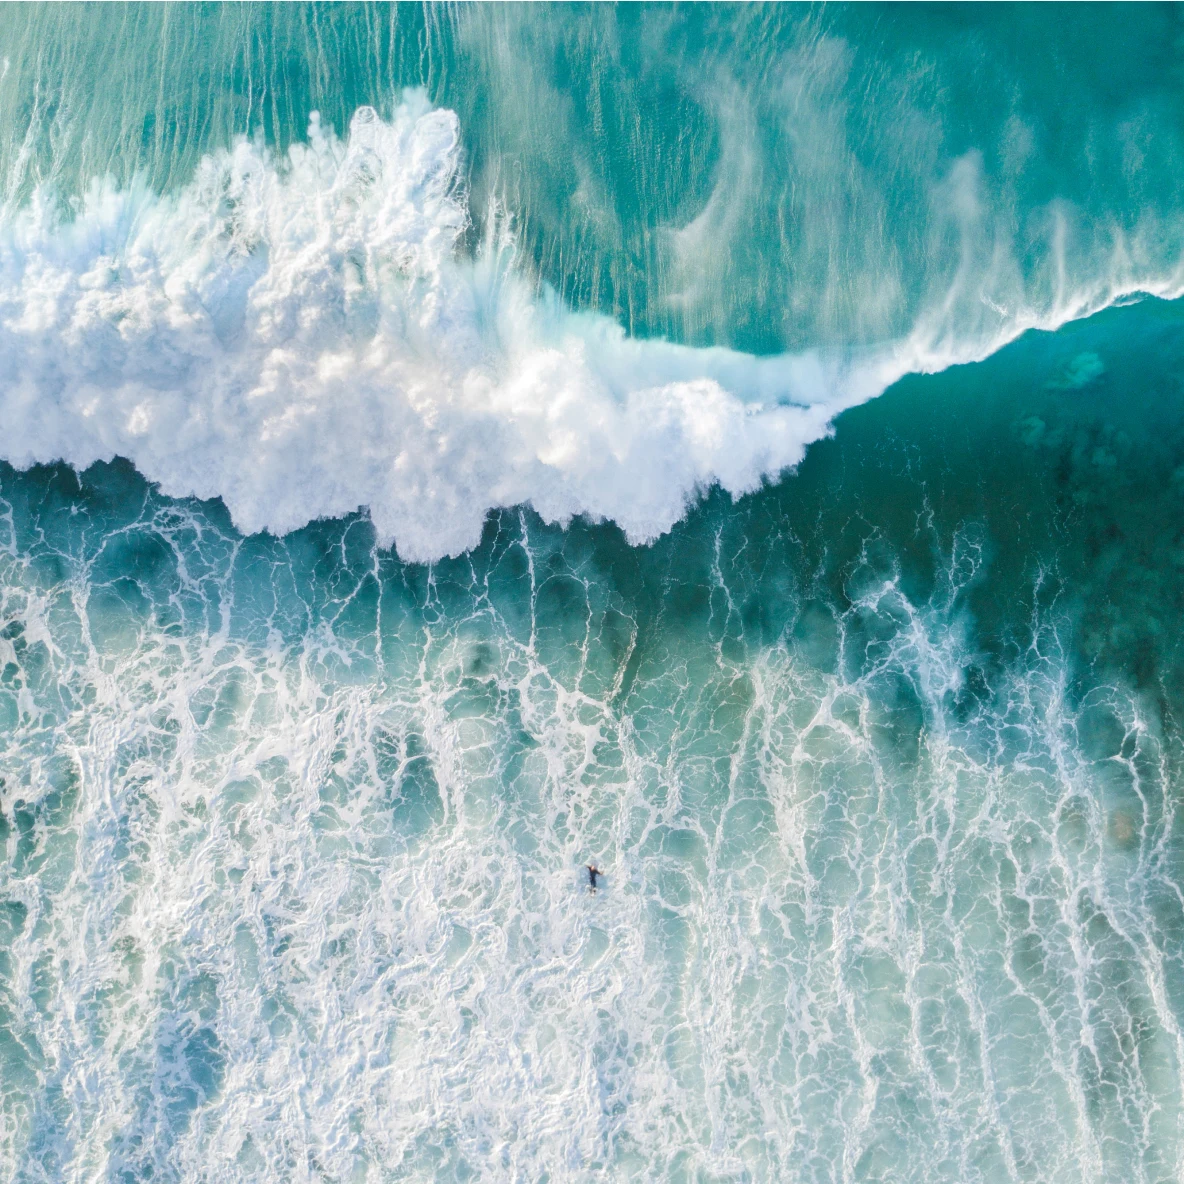 Aerial view of a blue-green crashing wave